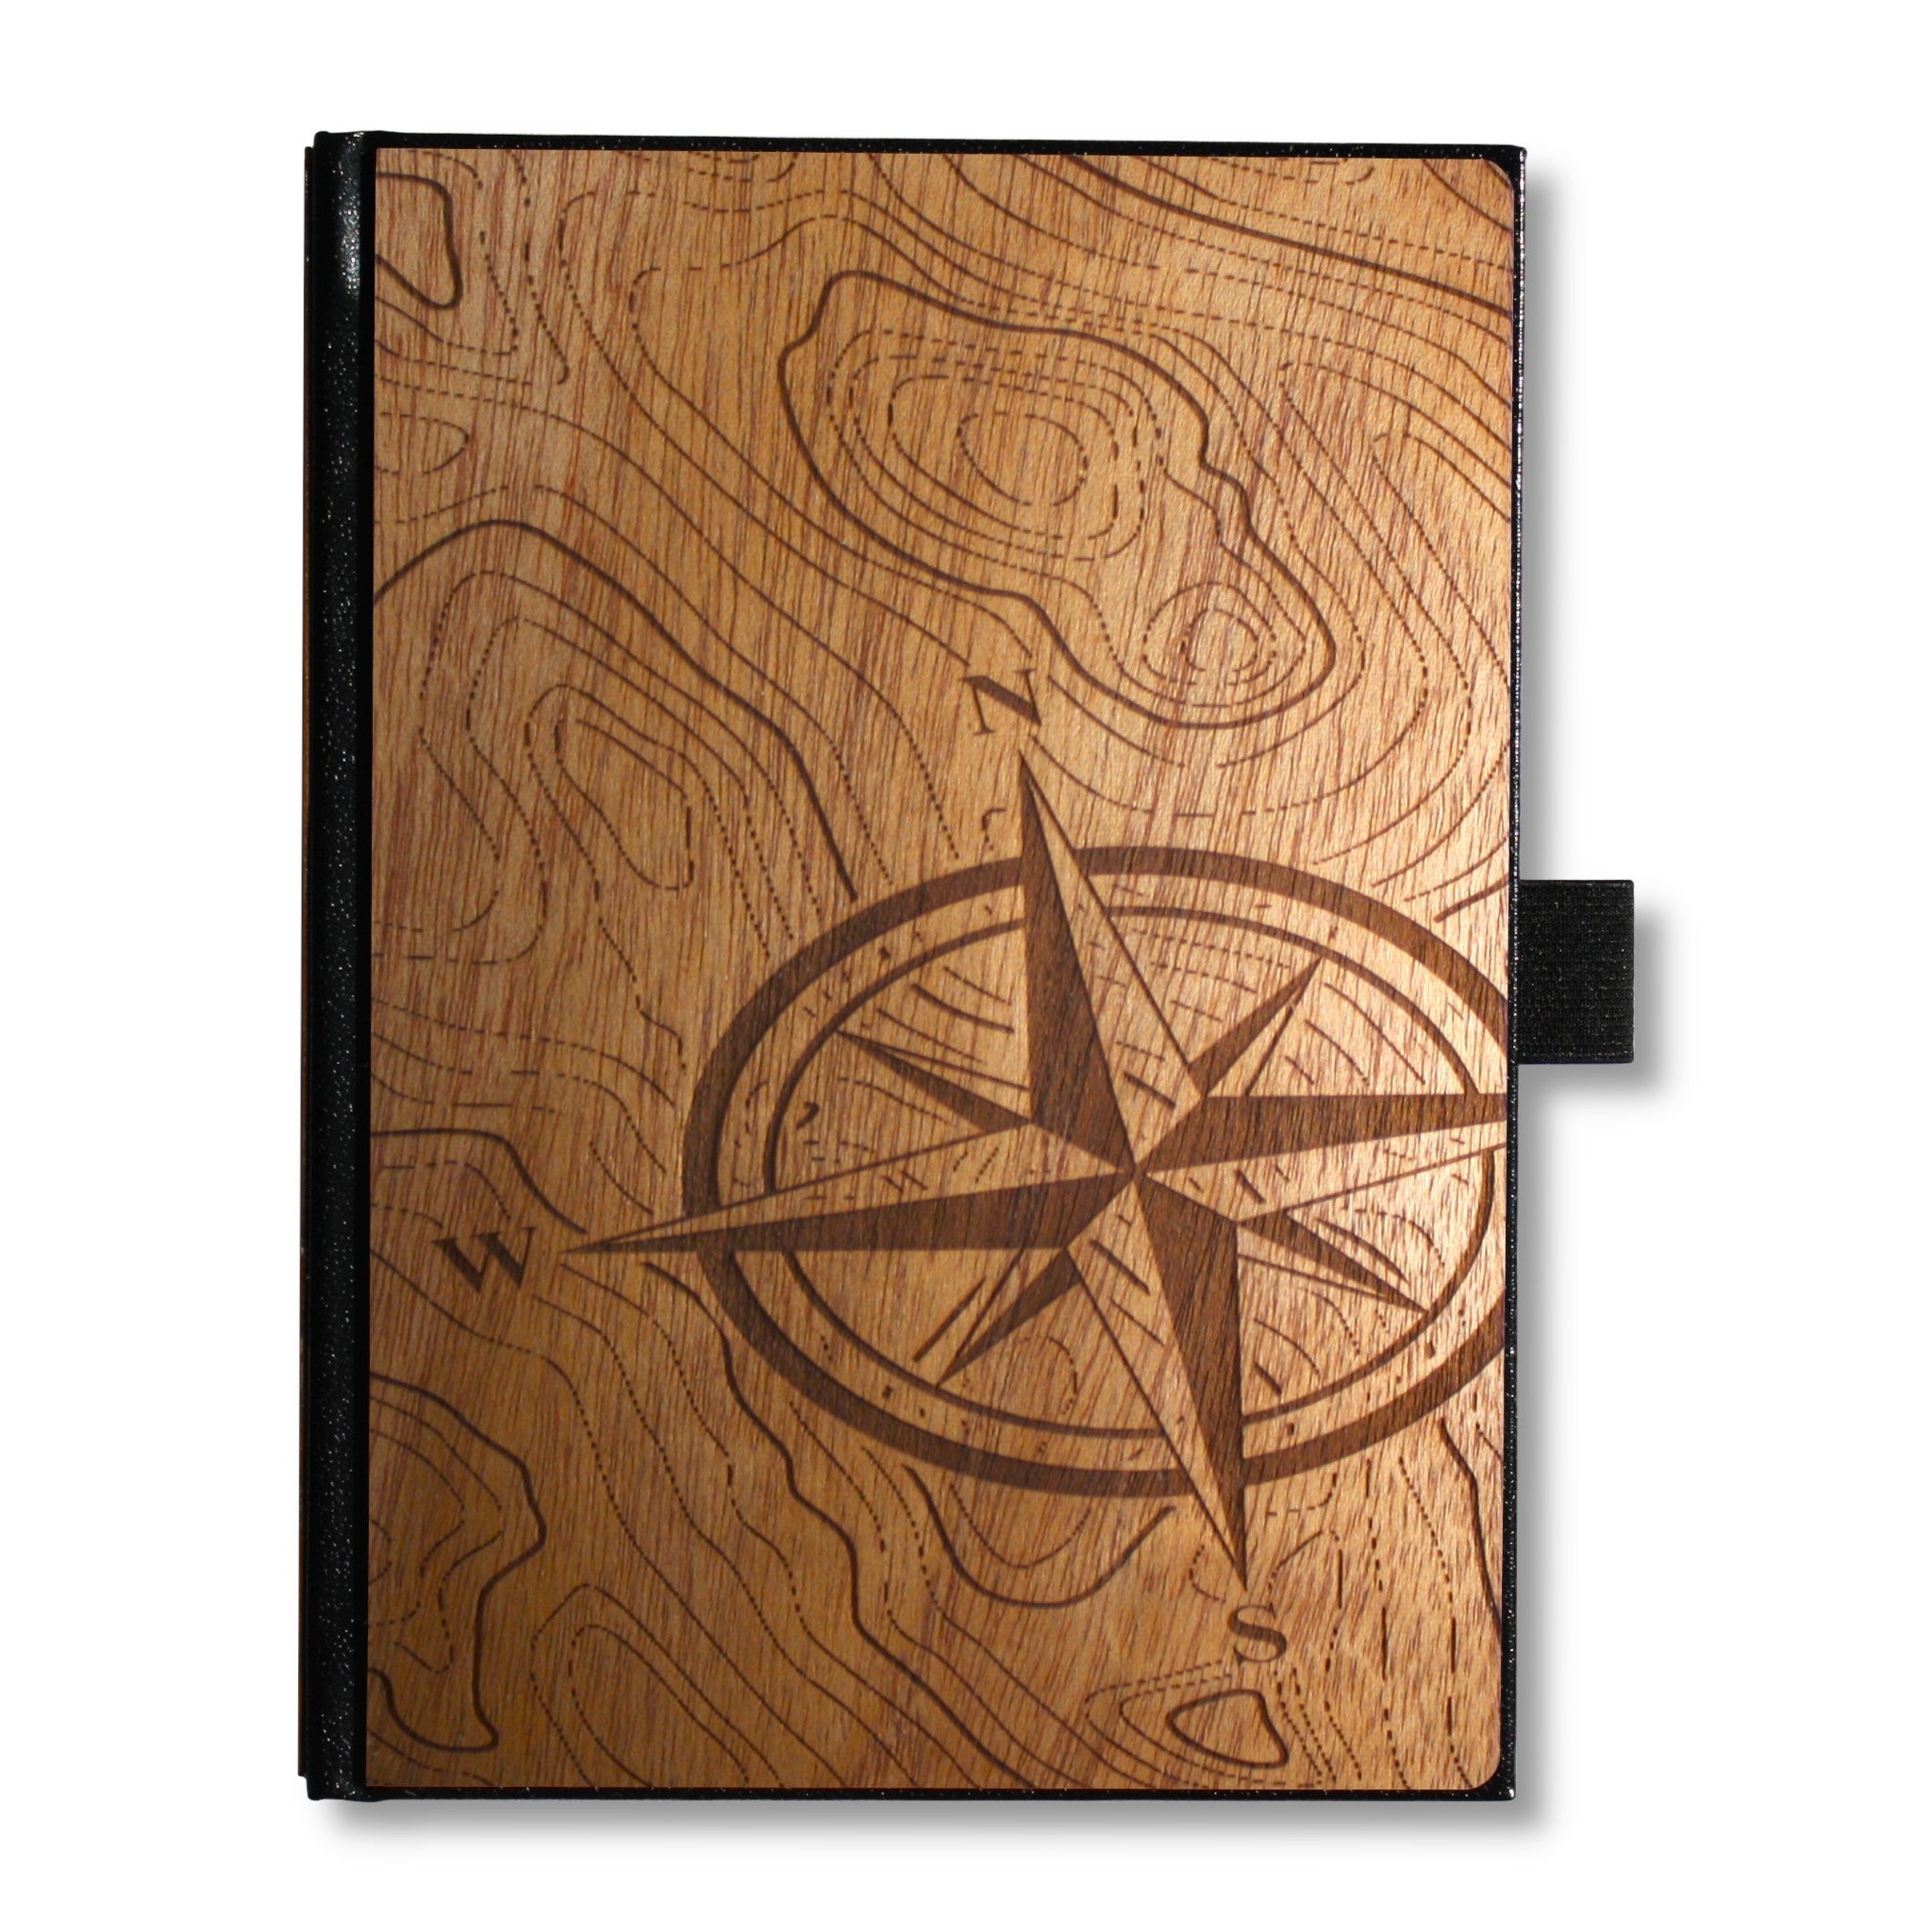 Handcrafted Wooden Journal / Planner (Compass Rose)